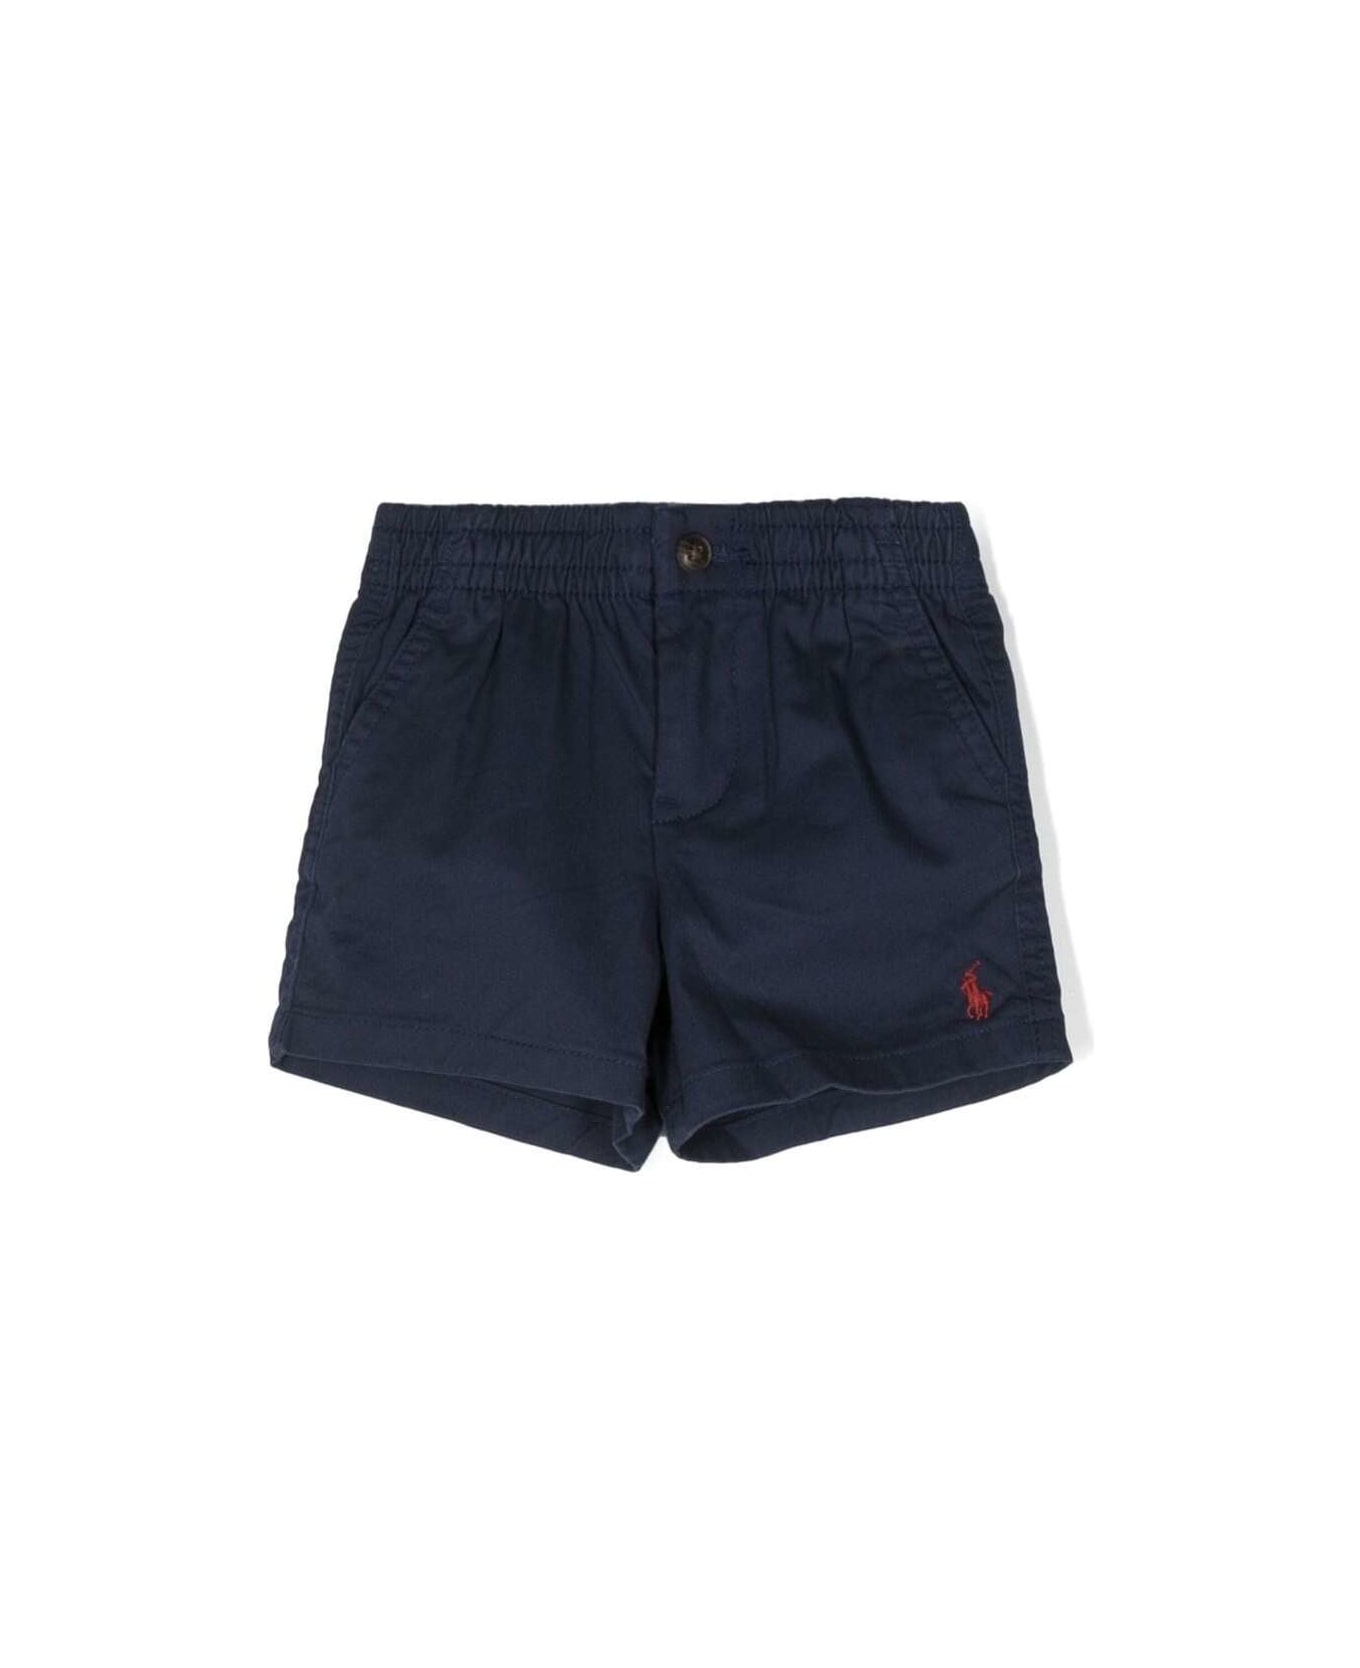 Polo Ralph Lauren Blue Shorts With Elastic Waistband And Pony Embroidery In Stretch Cotton Baby - Blu